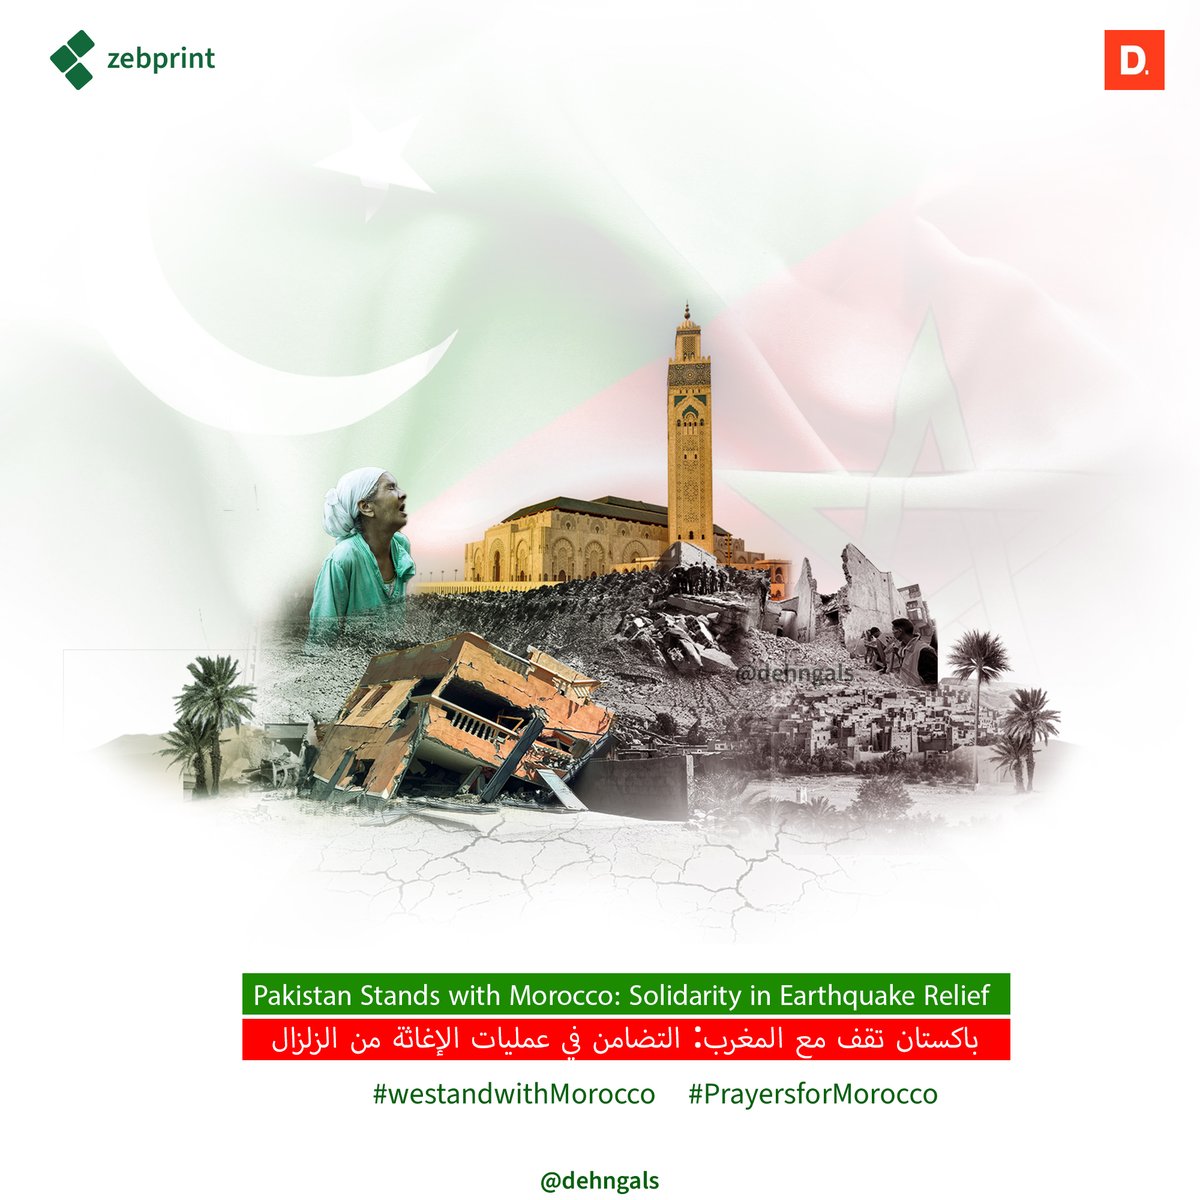 Pakistan Stands with Morocco: Solidarity in Earthquake Relief. May Allah help and protect those who are affected and have mercy on everyone
#pakistan #westandwithmorocco #prayersformorocco #dehngals #zebprint #zebfolio #زلزال_المغرب  #PAKvIND